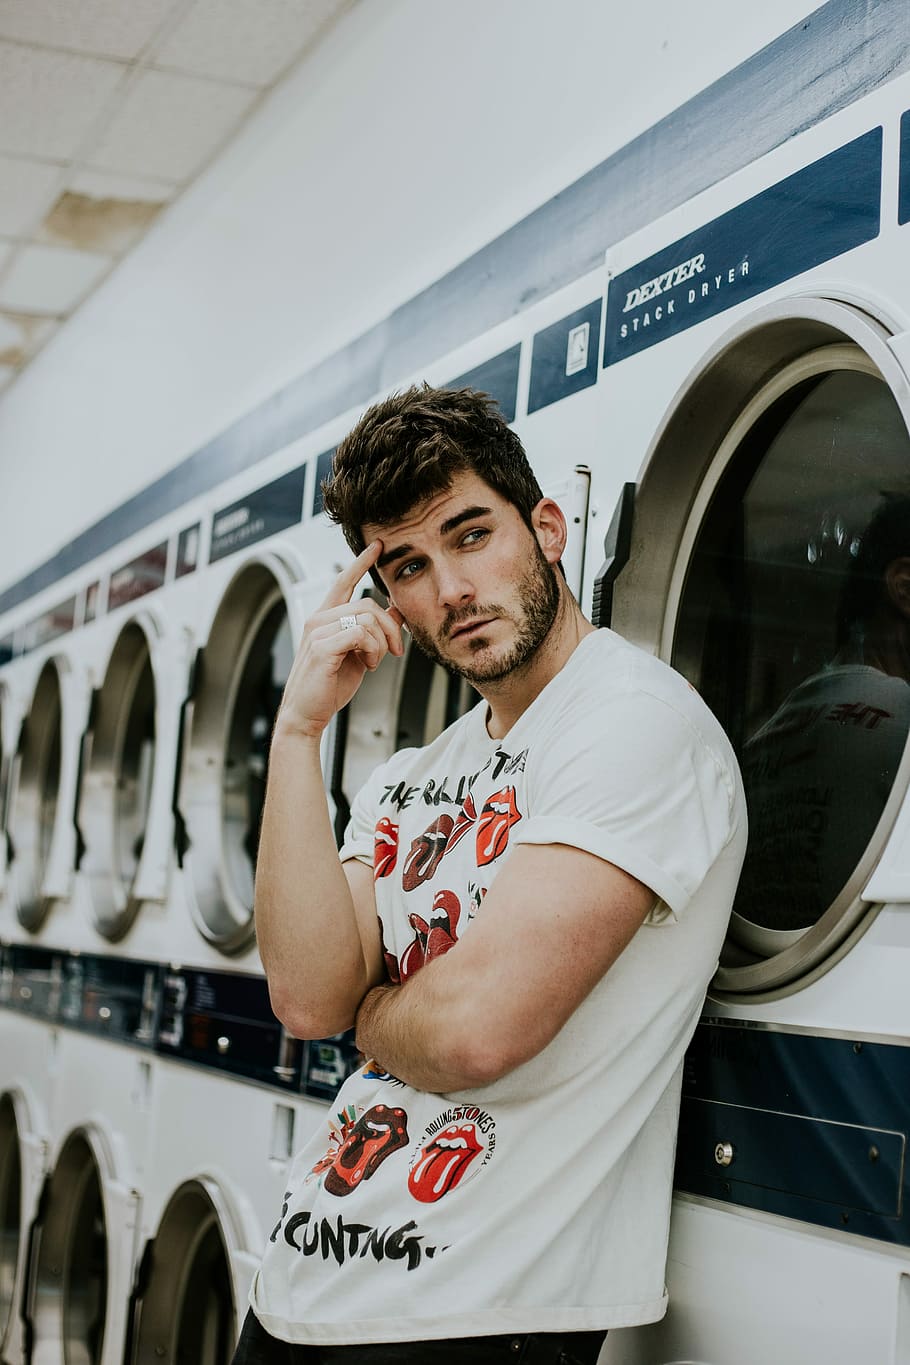 man leaning in front of clothes washer and dryer, laundry mat